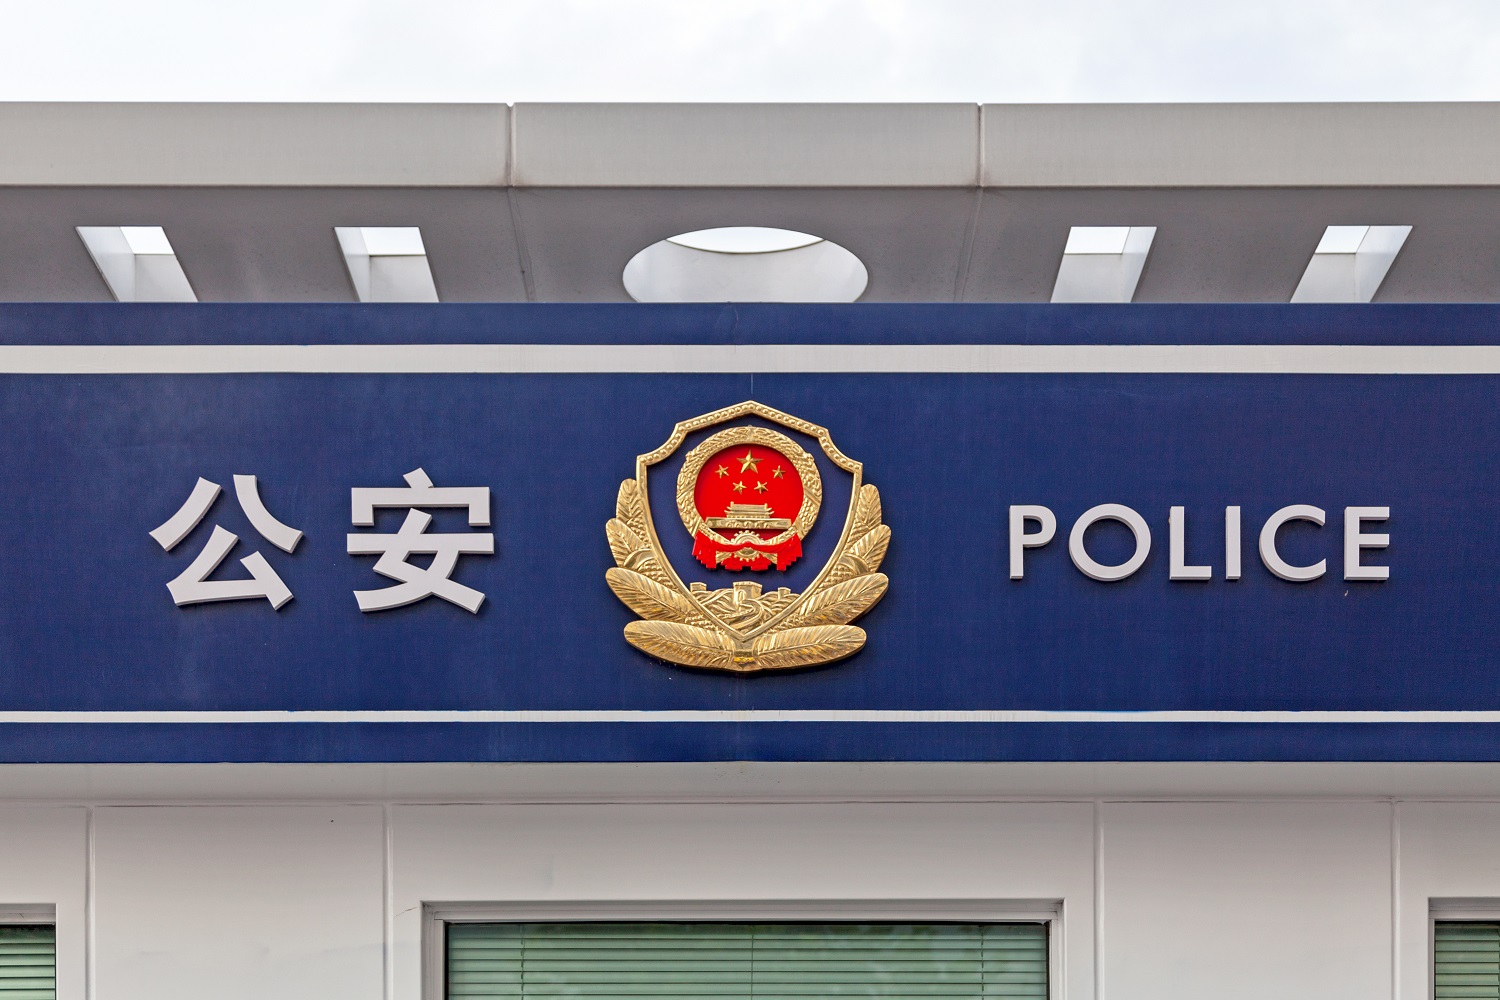 A sign that reads “police” in Chinese and English outside a Chinese police station.